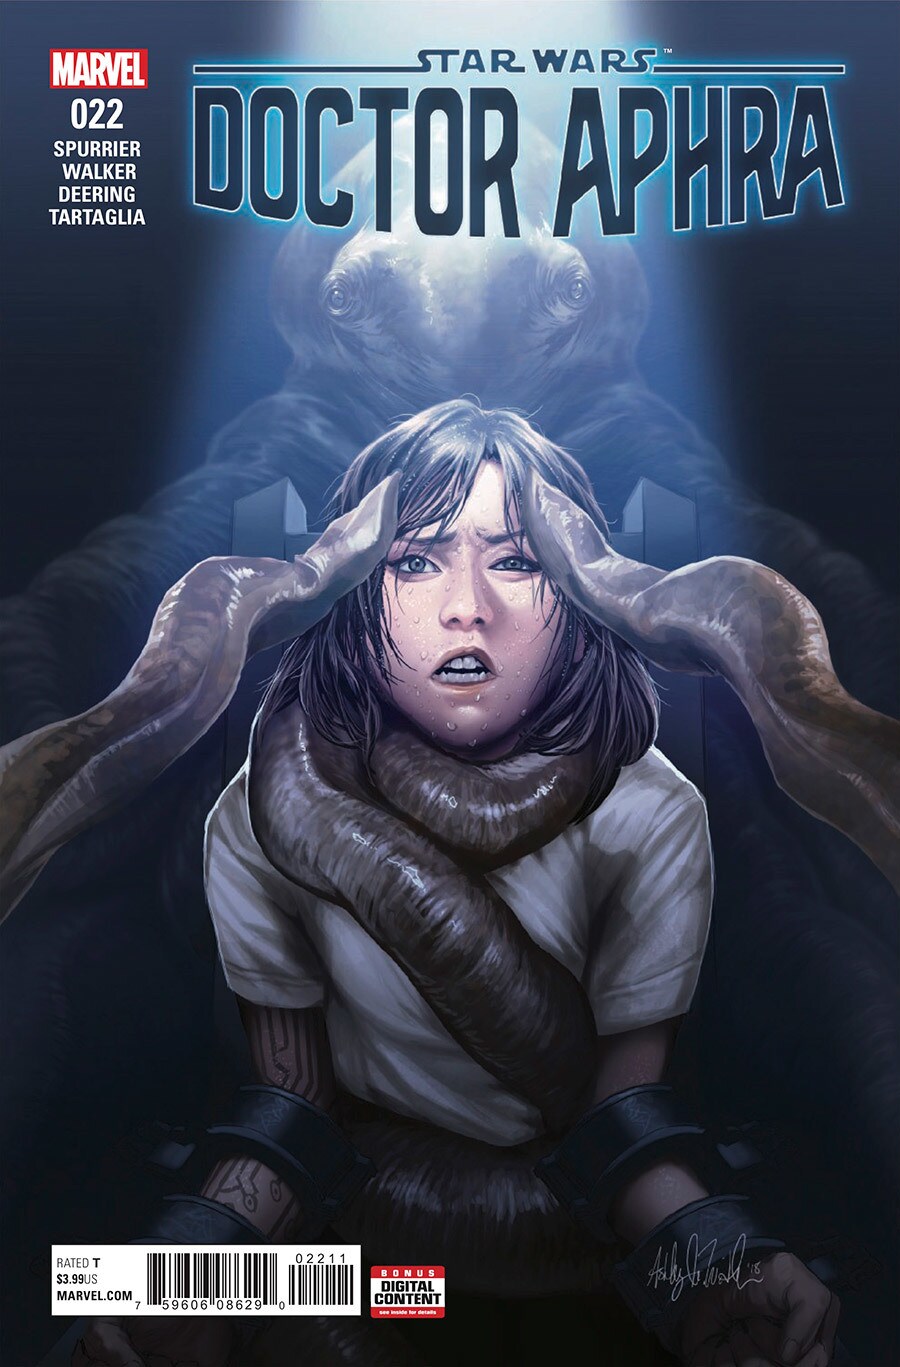 Aphra is held captive by a tentacled being on the cover of Doctor Aphra #22.